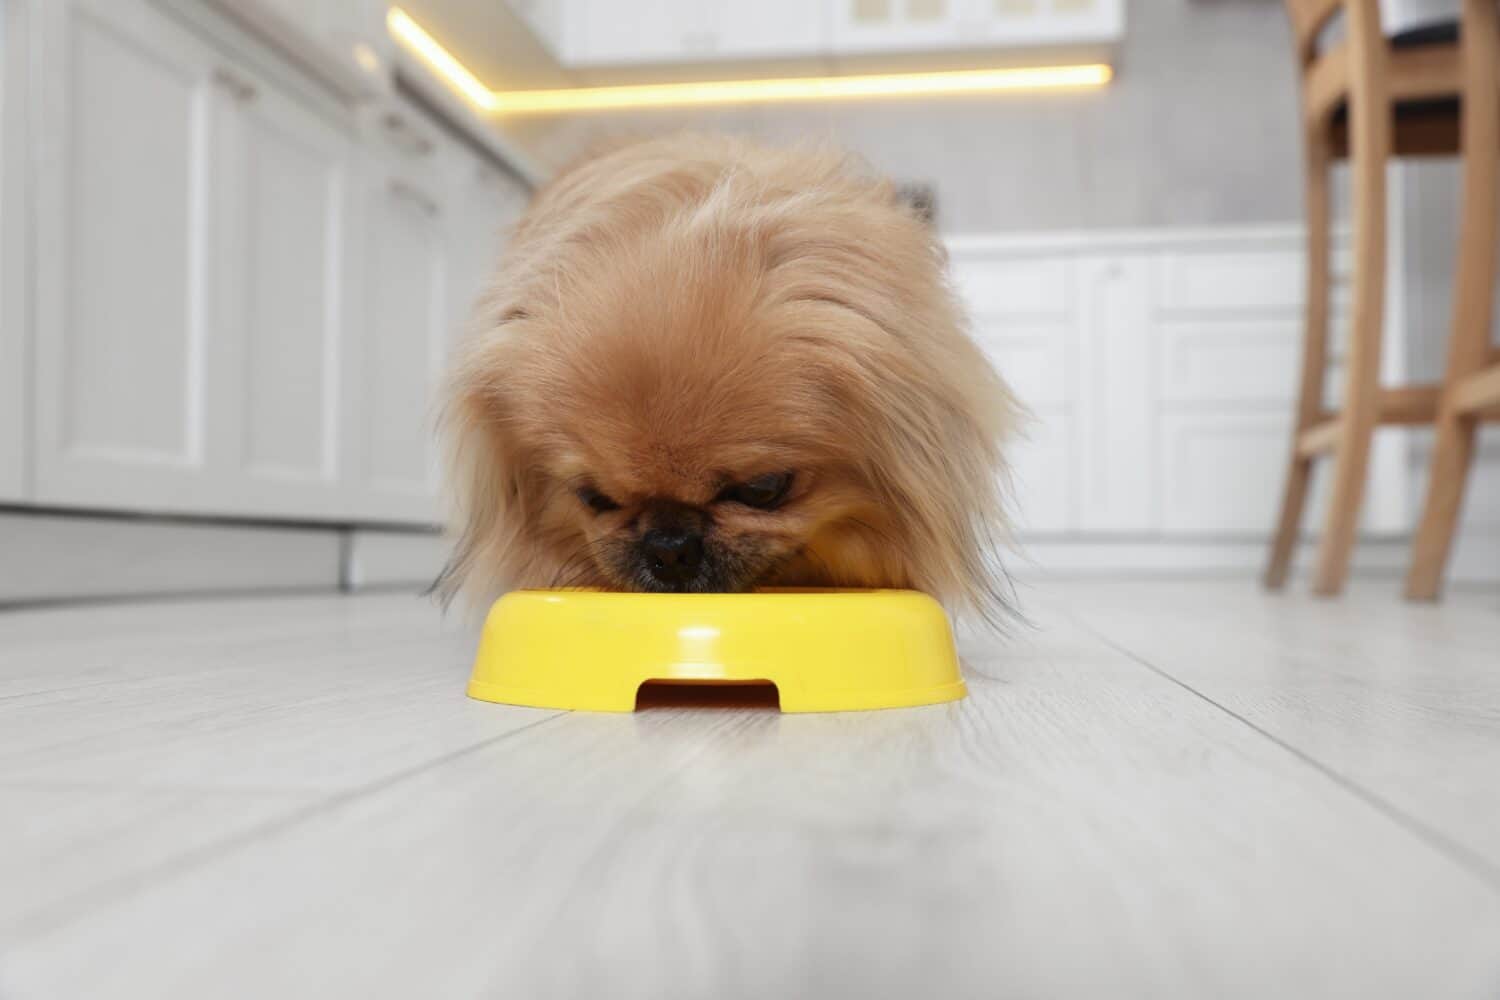 Cute Pekingese dog eating from pet bowl in kitchen